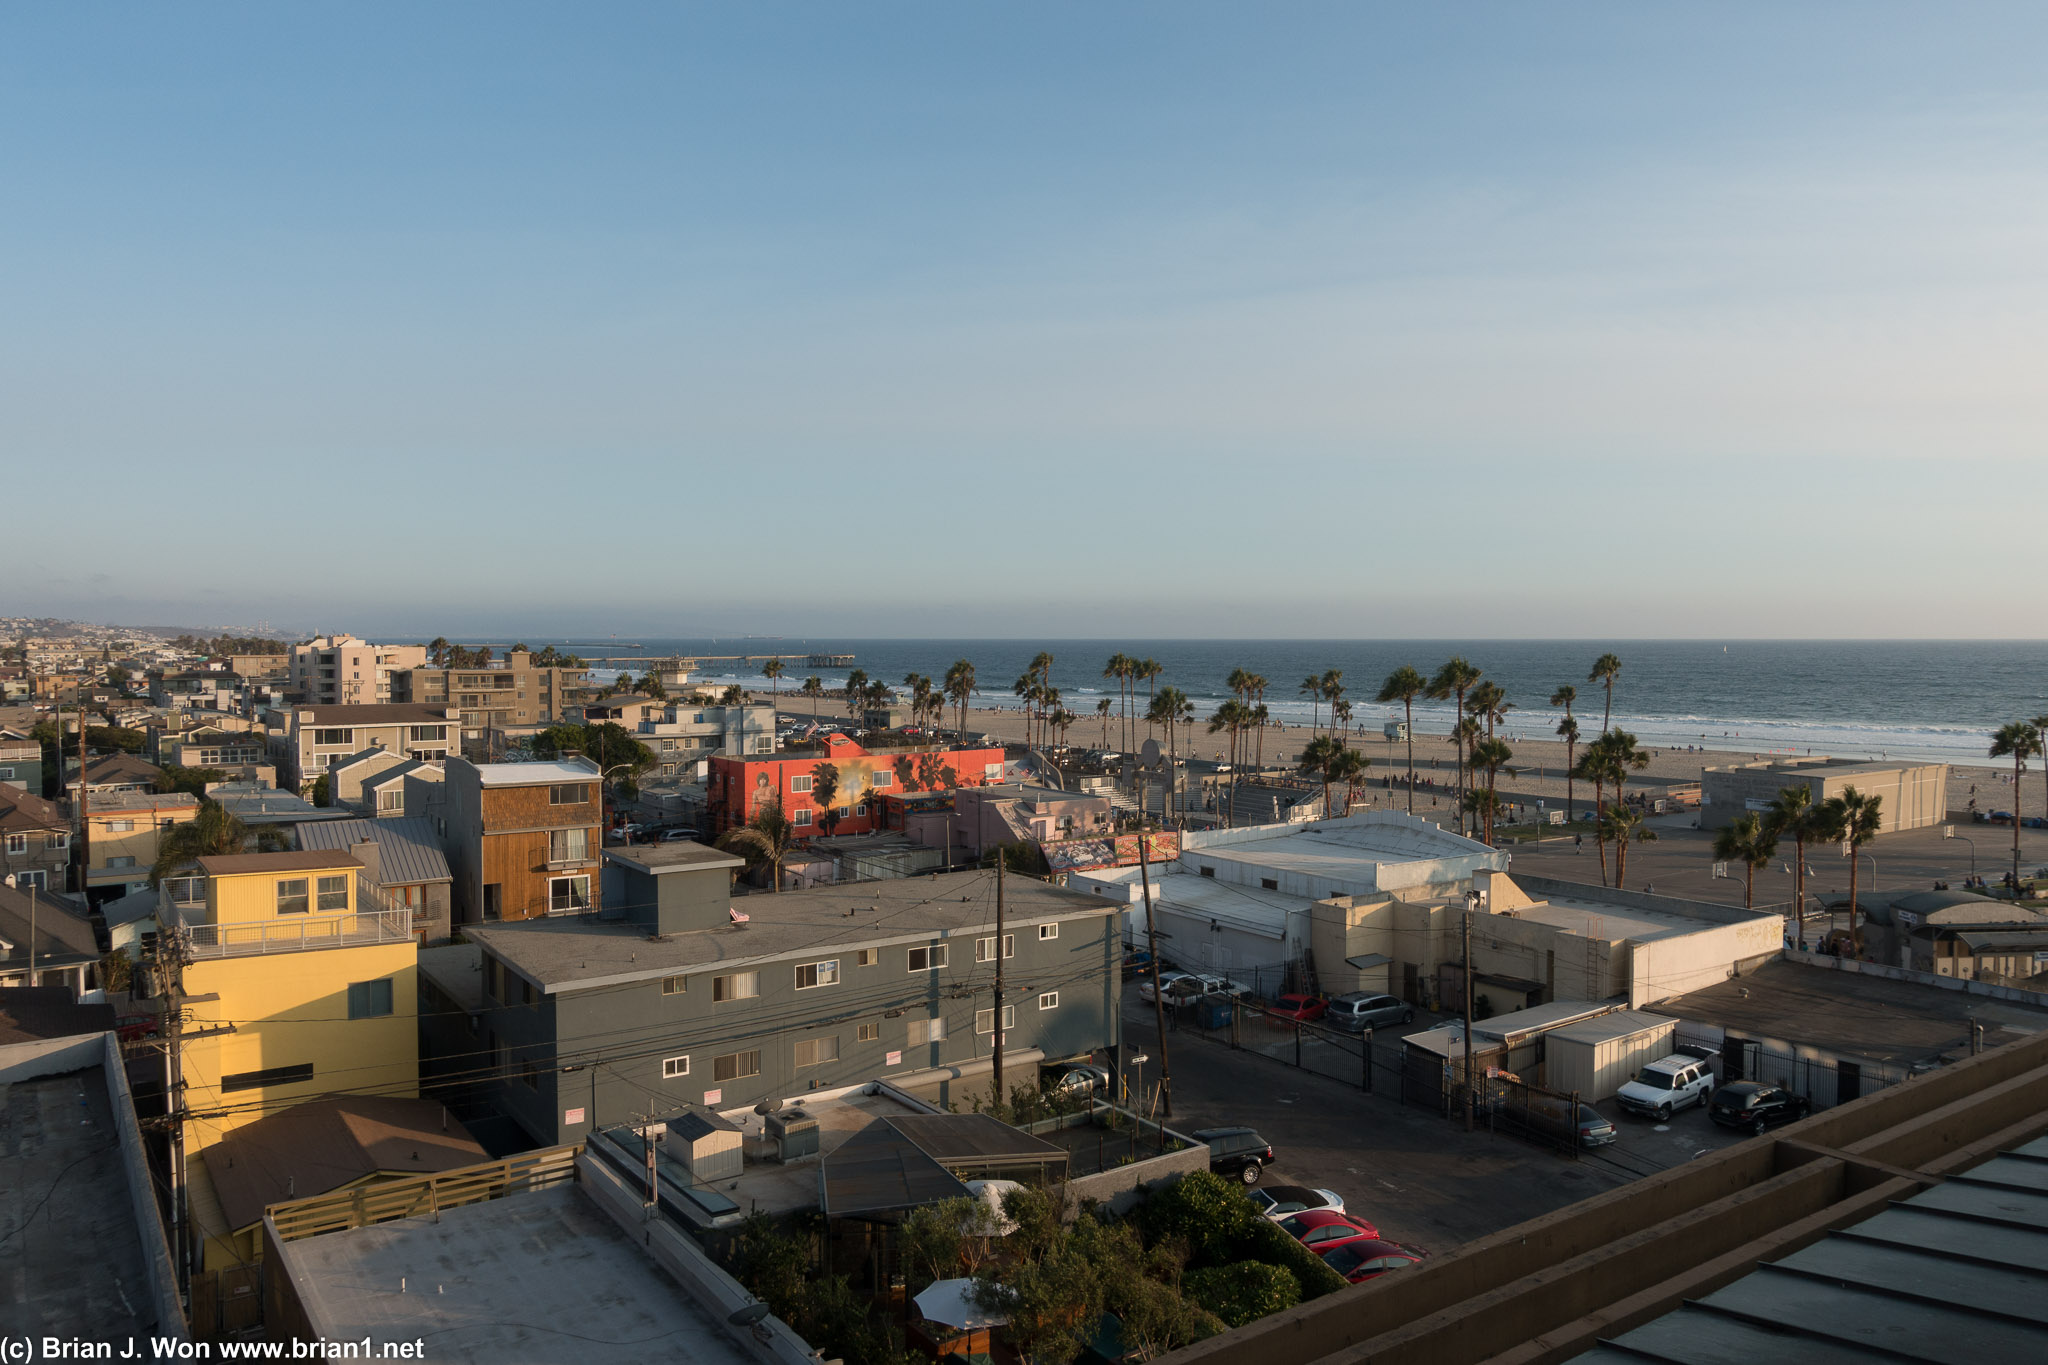 Venice Beach from the High Rooftop Lounge, Hotel Erwin.